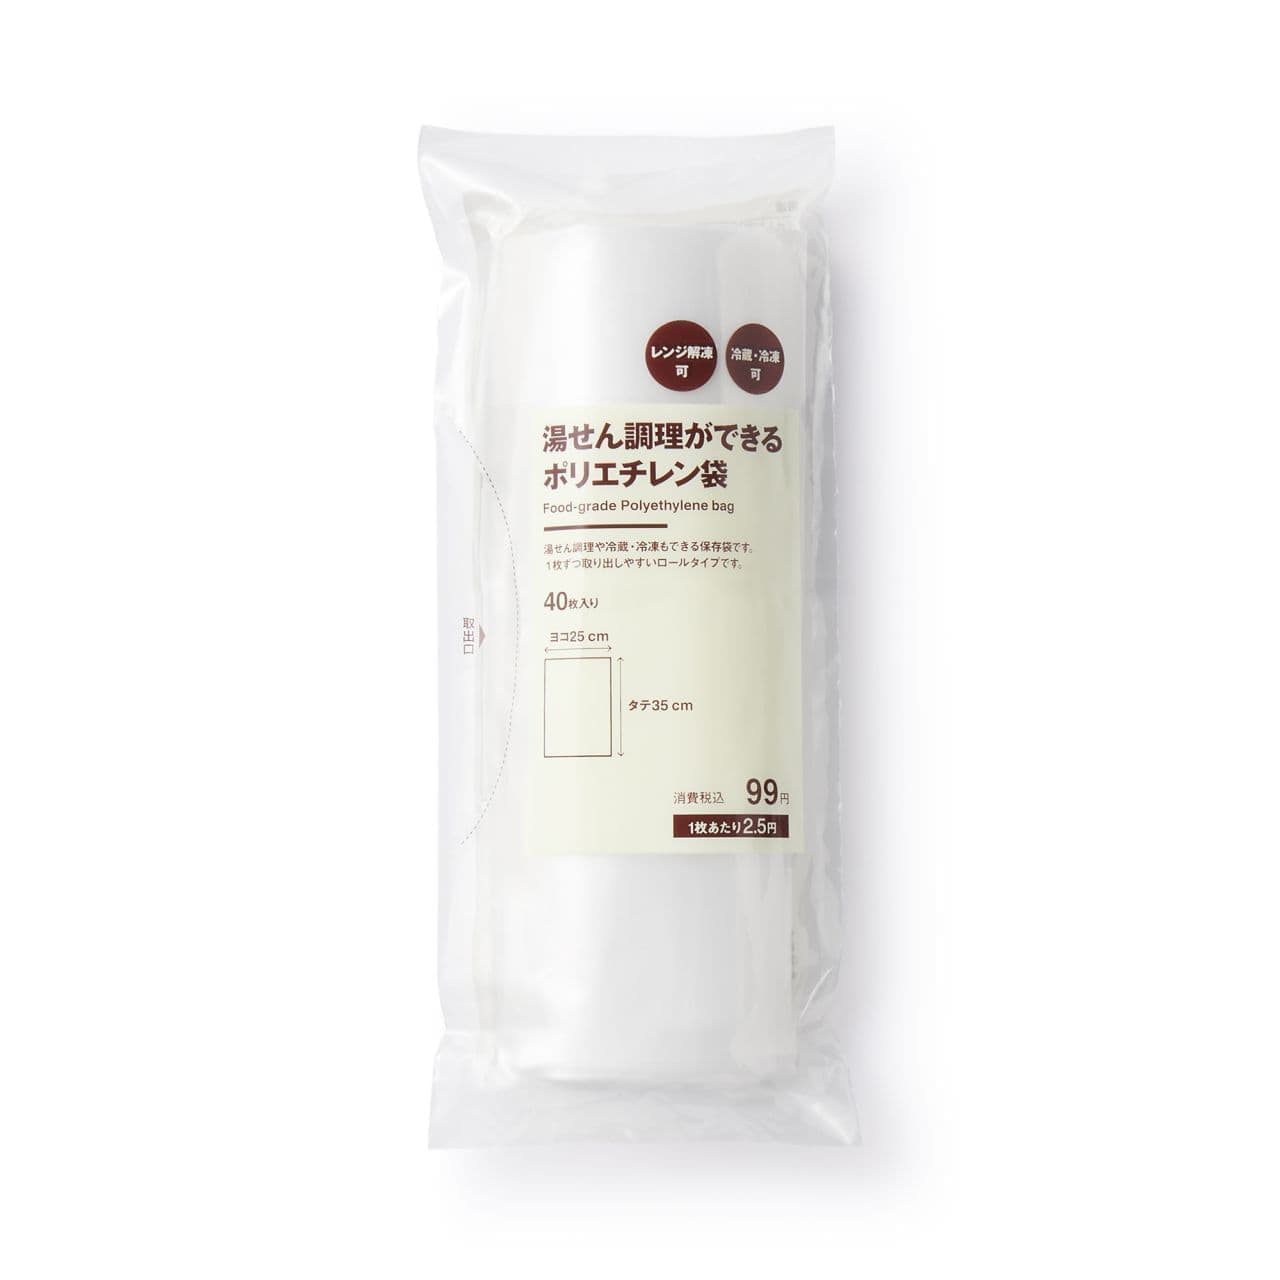 MUJI "Polyethylene bags that can be used for cooking in hot water